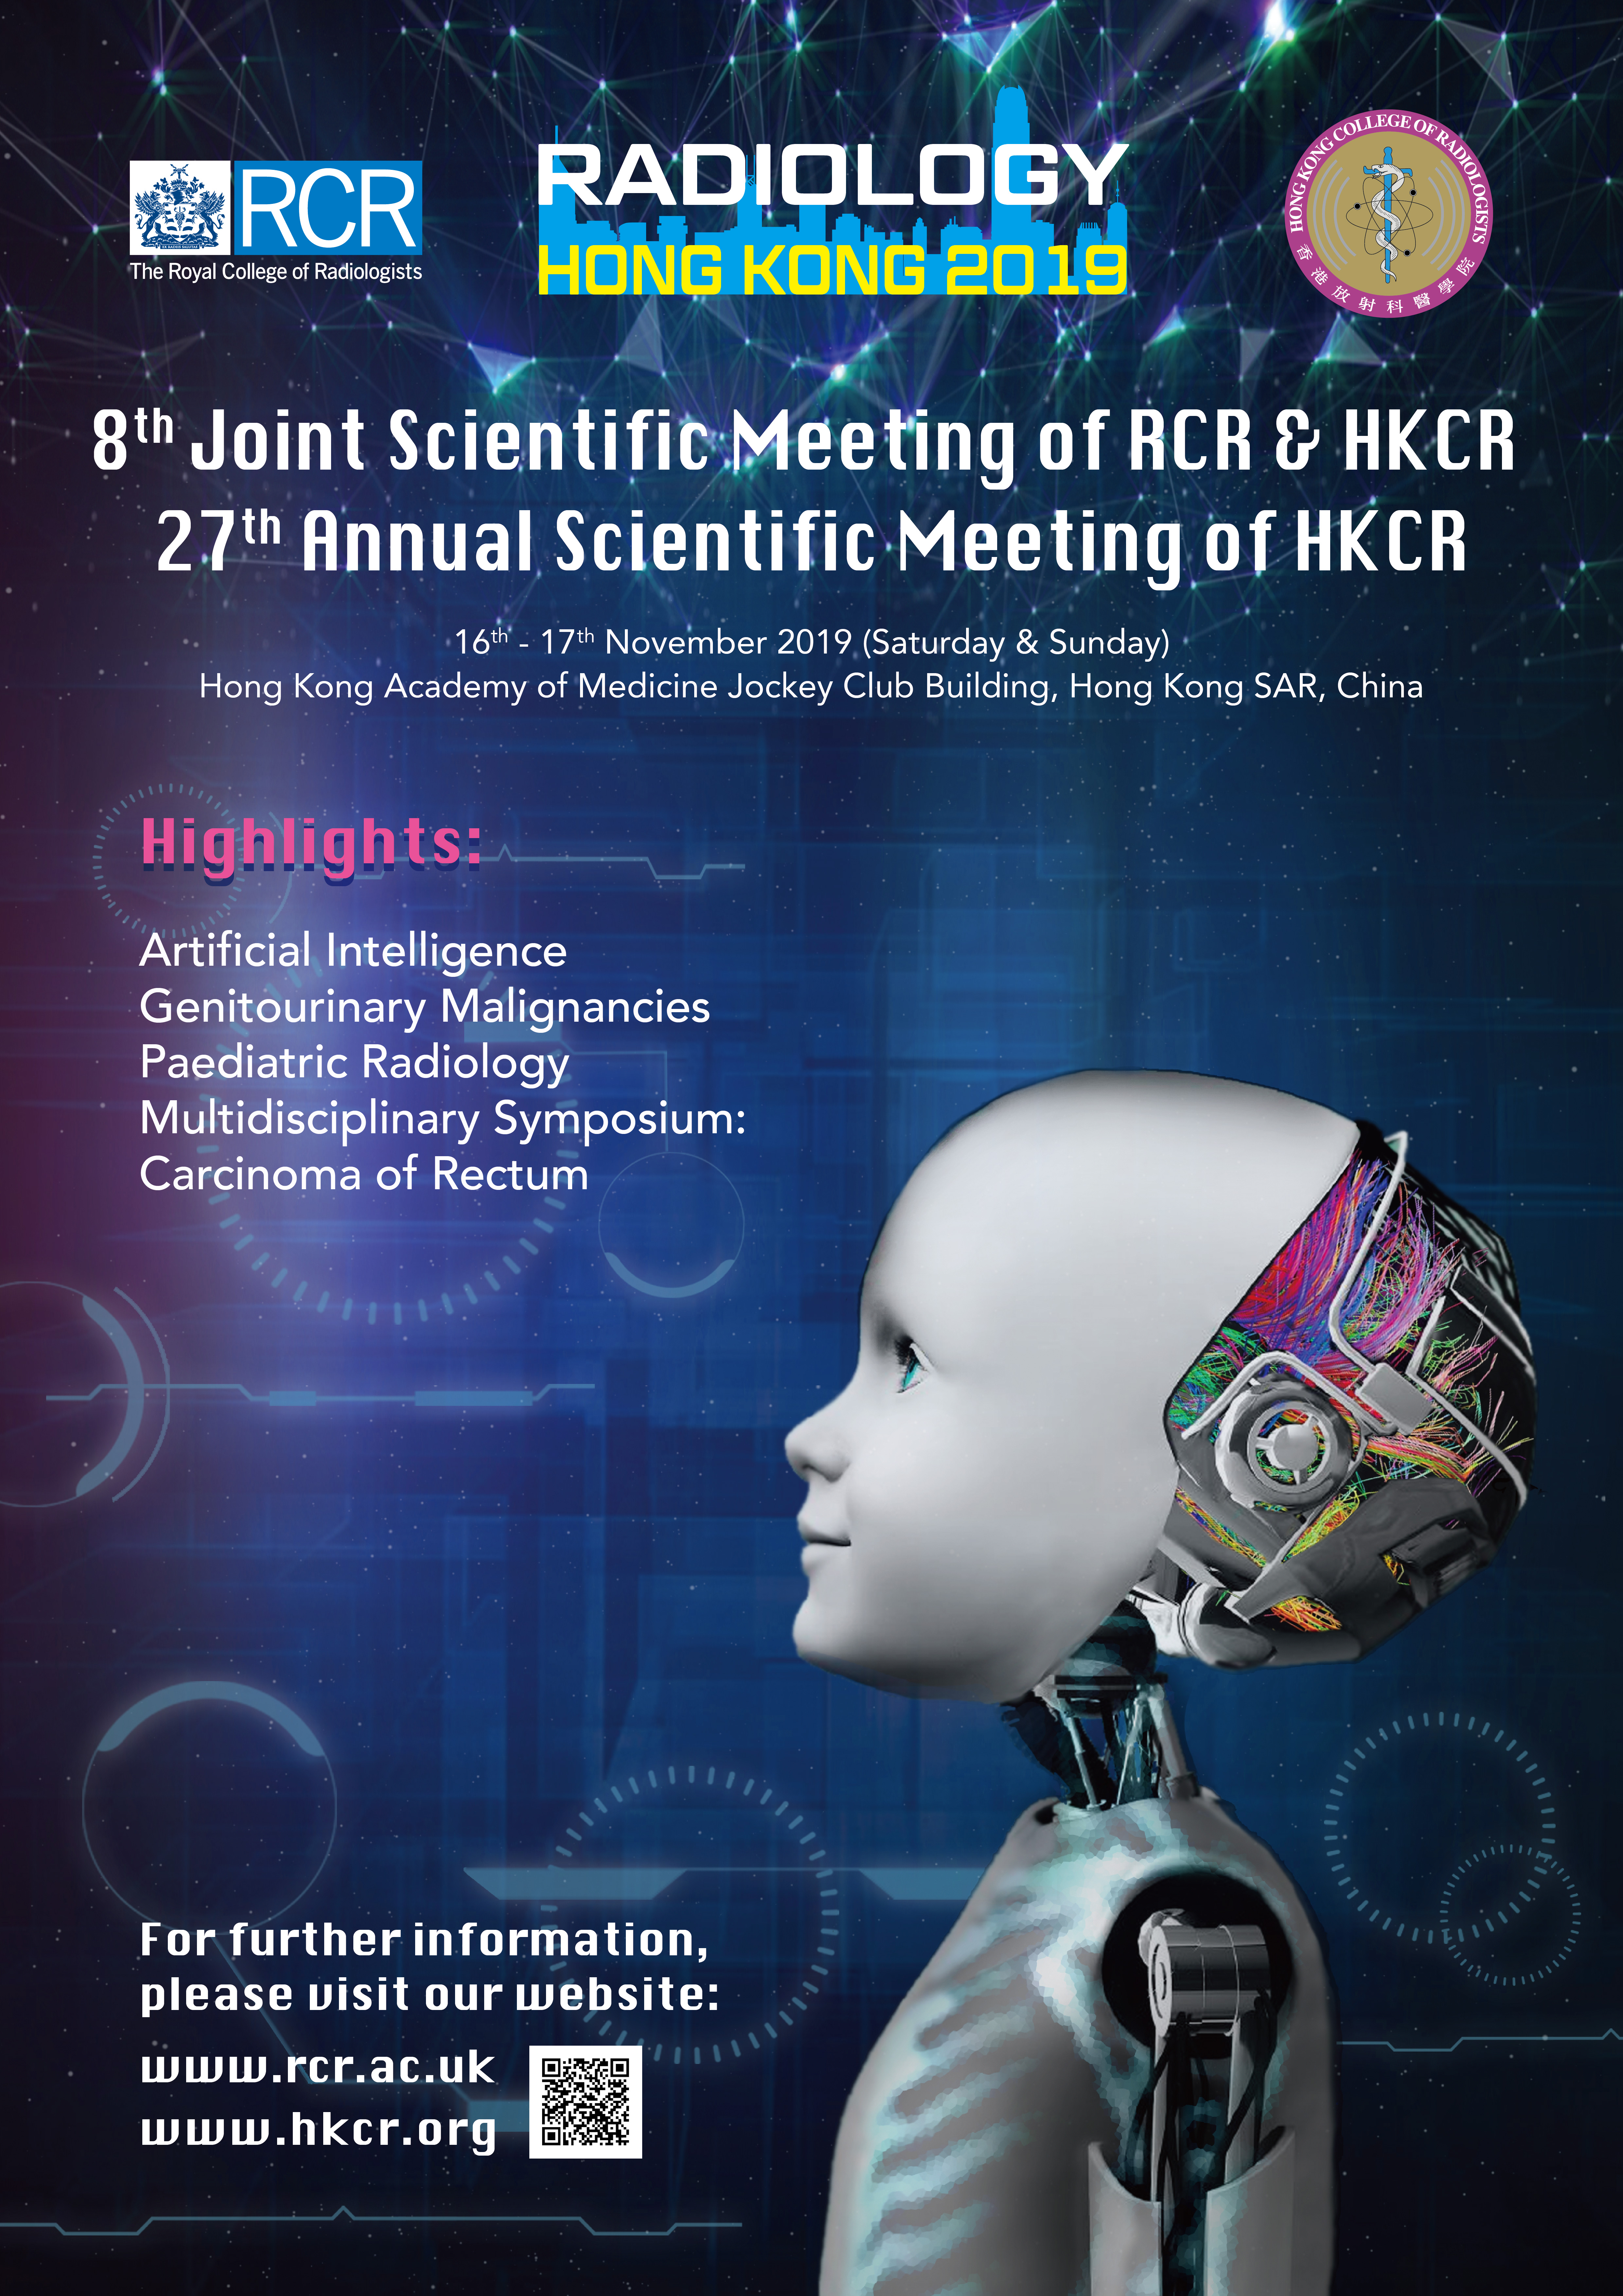 8th Joint Scientific Meeting of RCR & HKCR and 27th Annual Scientific Meeting of HKCR